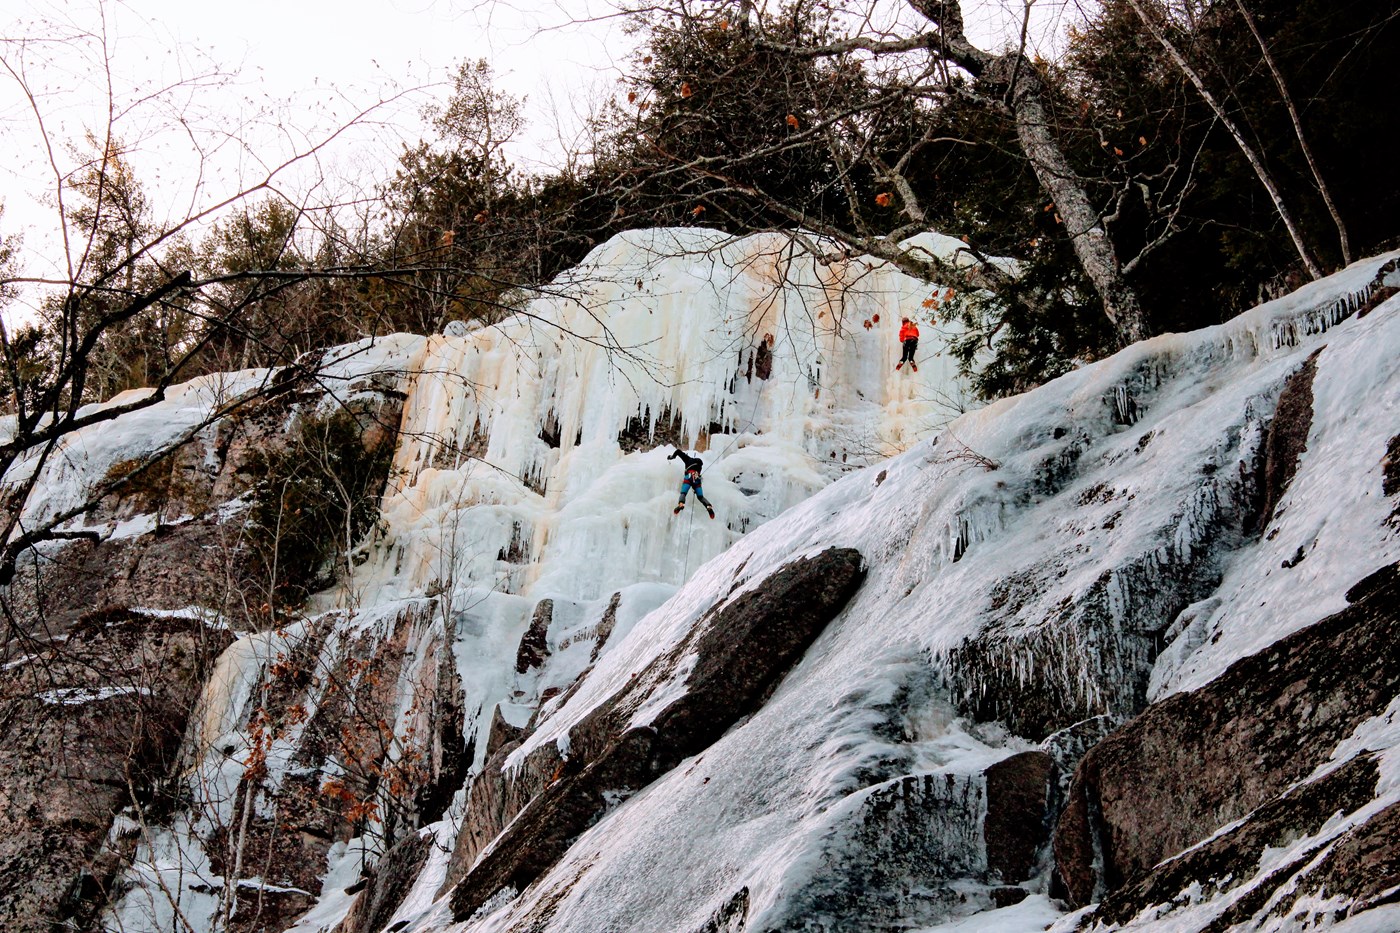 Two Ice Climbers High on a Cliff